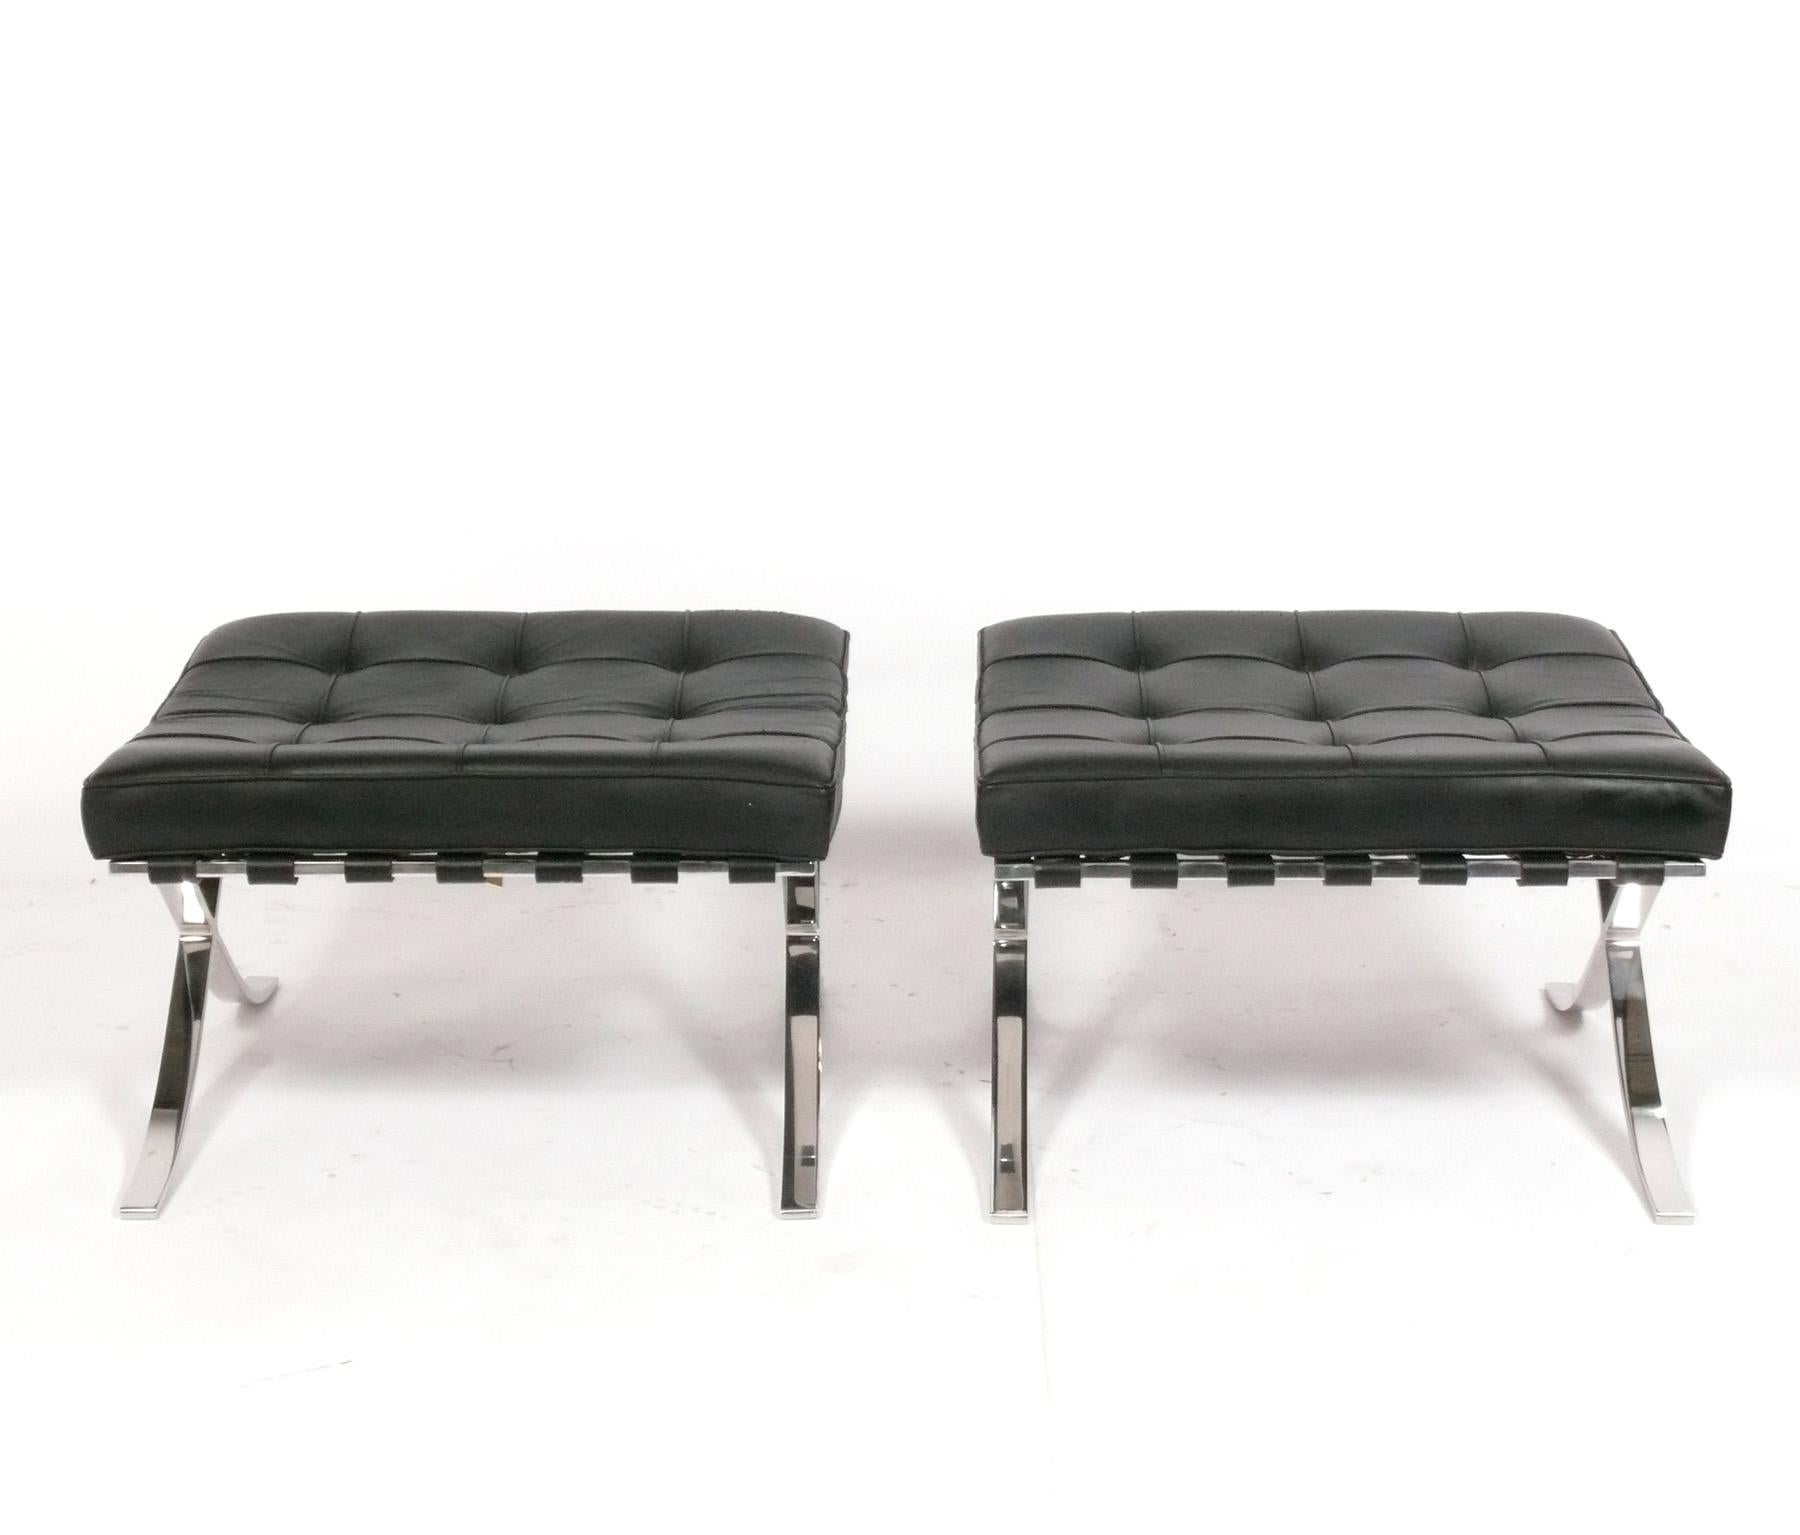 Mid-Century Modern Mies van der Rohe for Knoll Barcelona Ottomans circa 1979 Pair Available For Sale